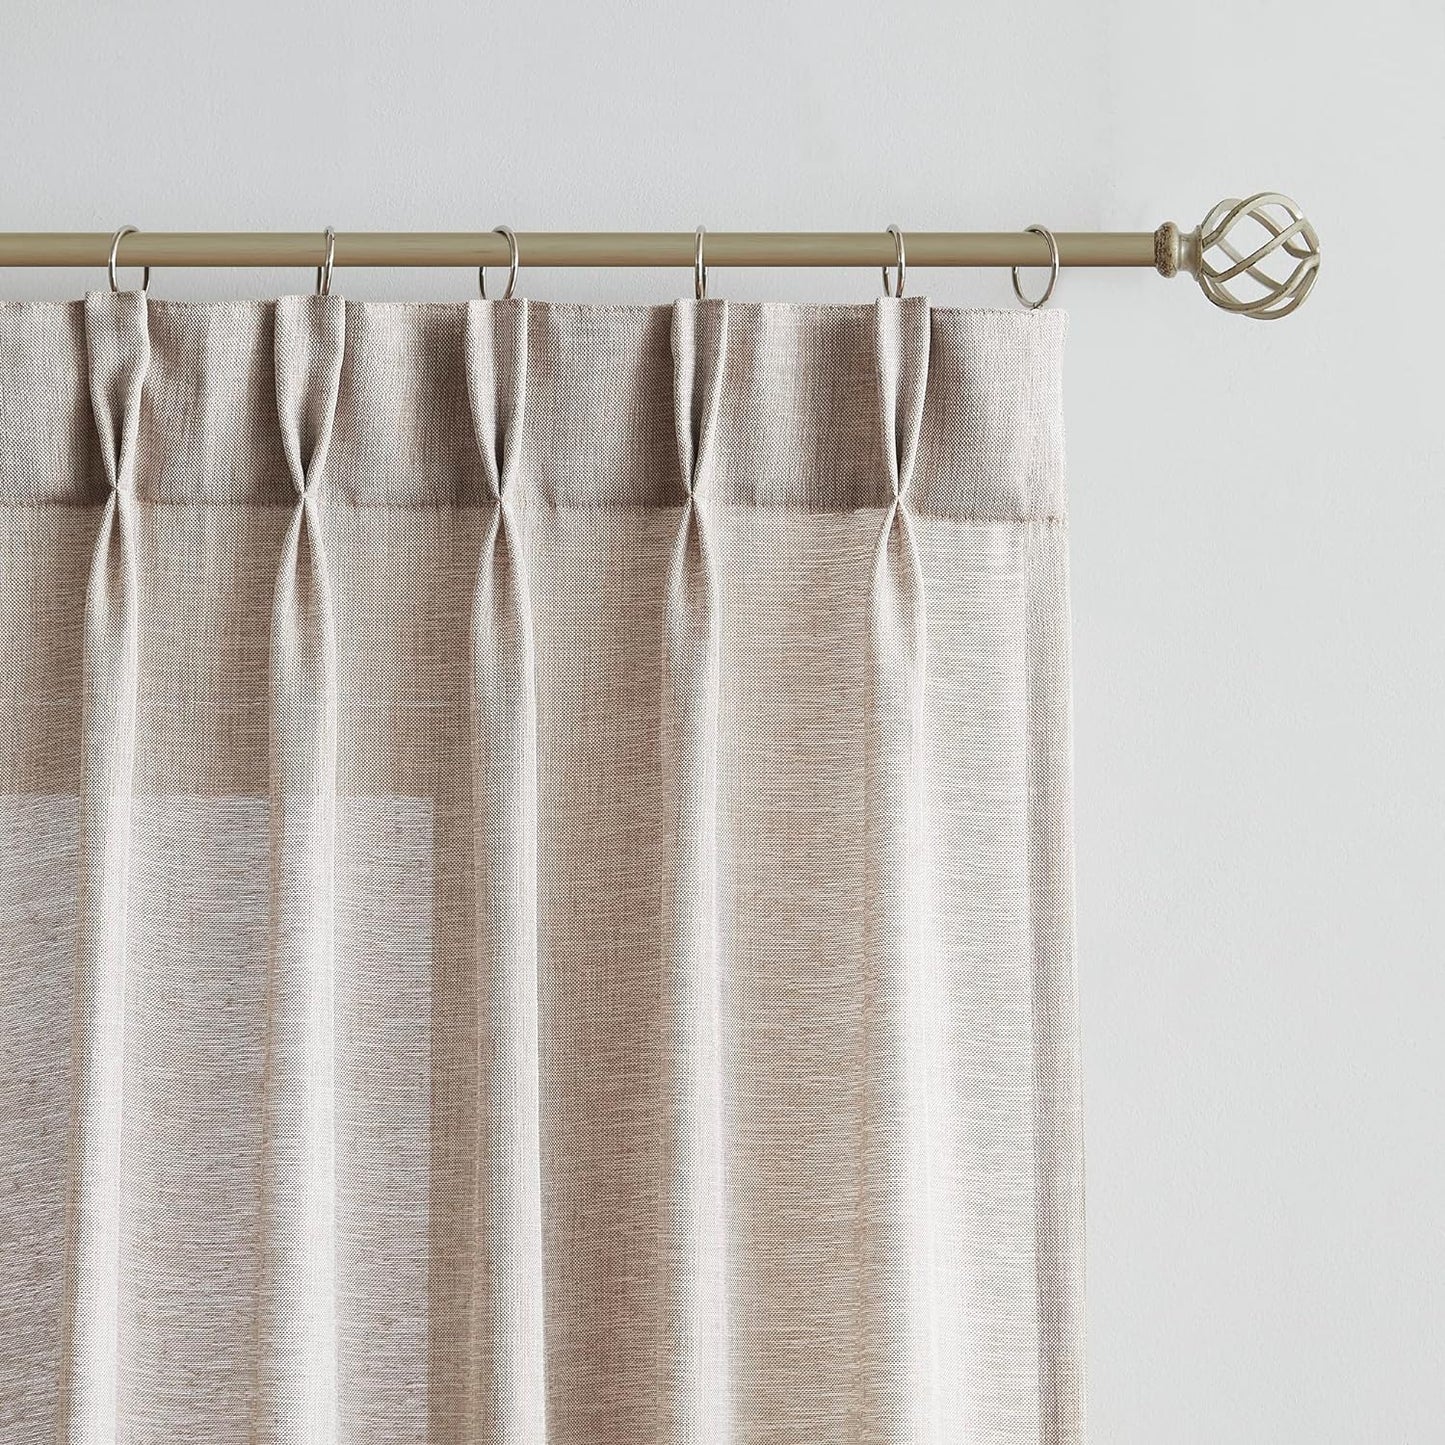 Enactex Linen Textured Pinch Pleat 25 X 84 Inch Semi Sheer Back Tab Curtains Light Filtering Drapes for Living Room Farmhouse Privacy Protect Window Treatments for Bedroom Patio Door 2 Panels, Tan  Enactex Tan 25"X95"X2 